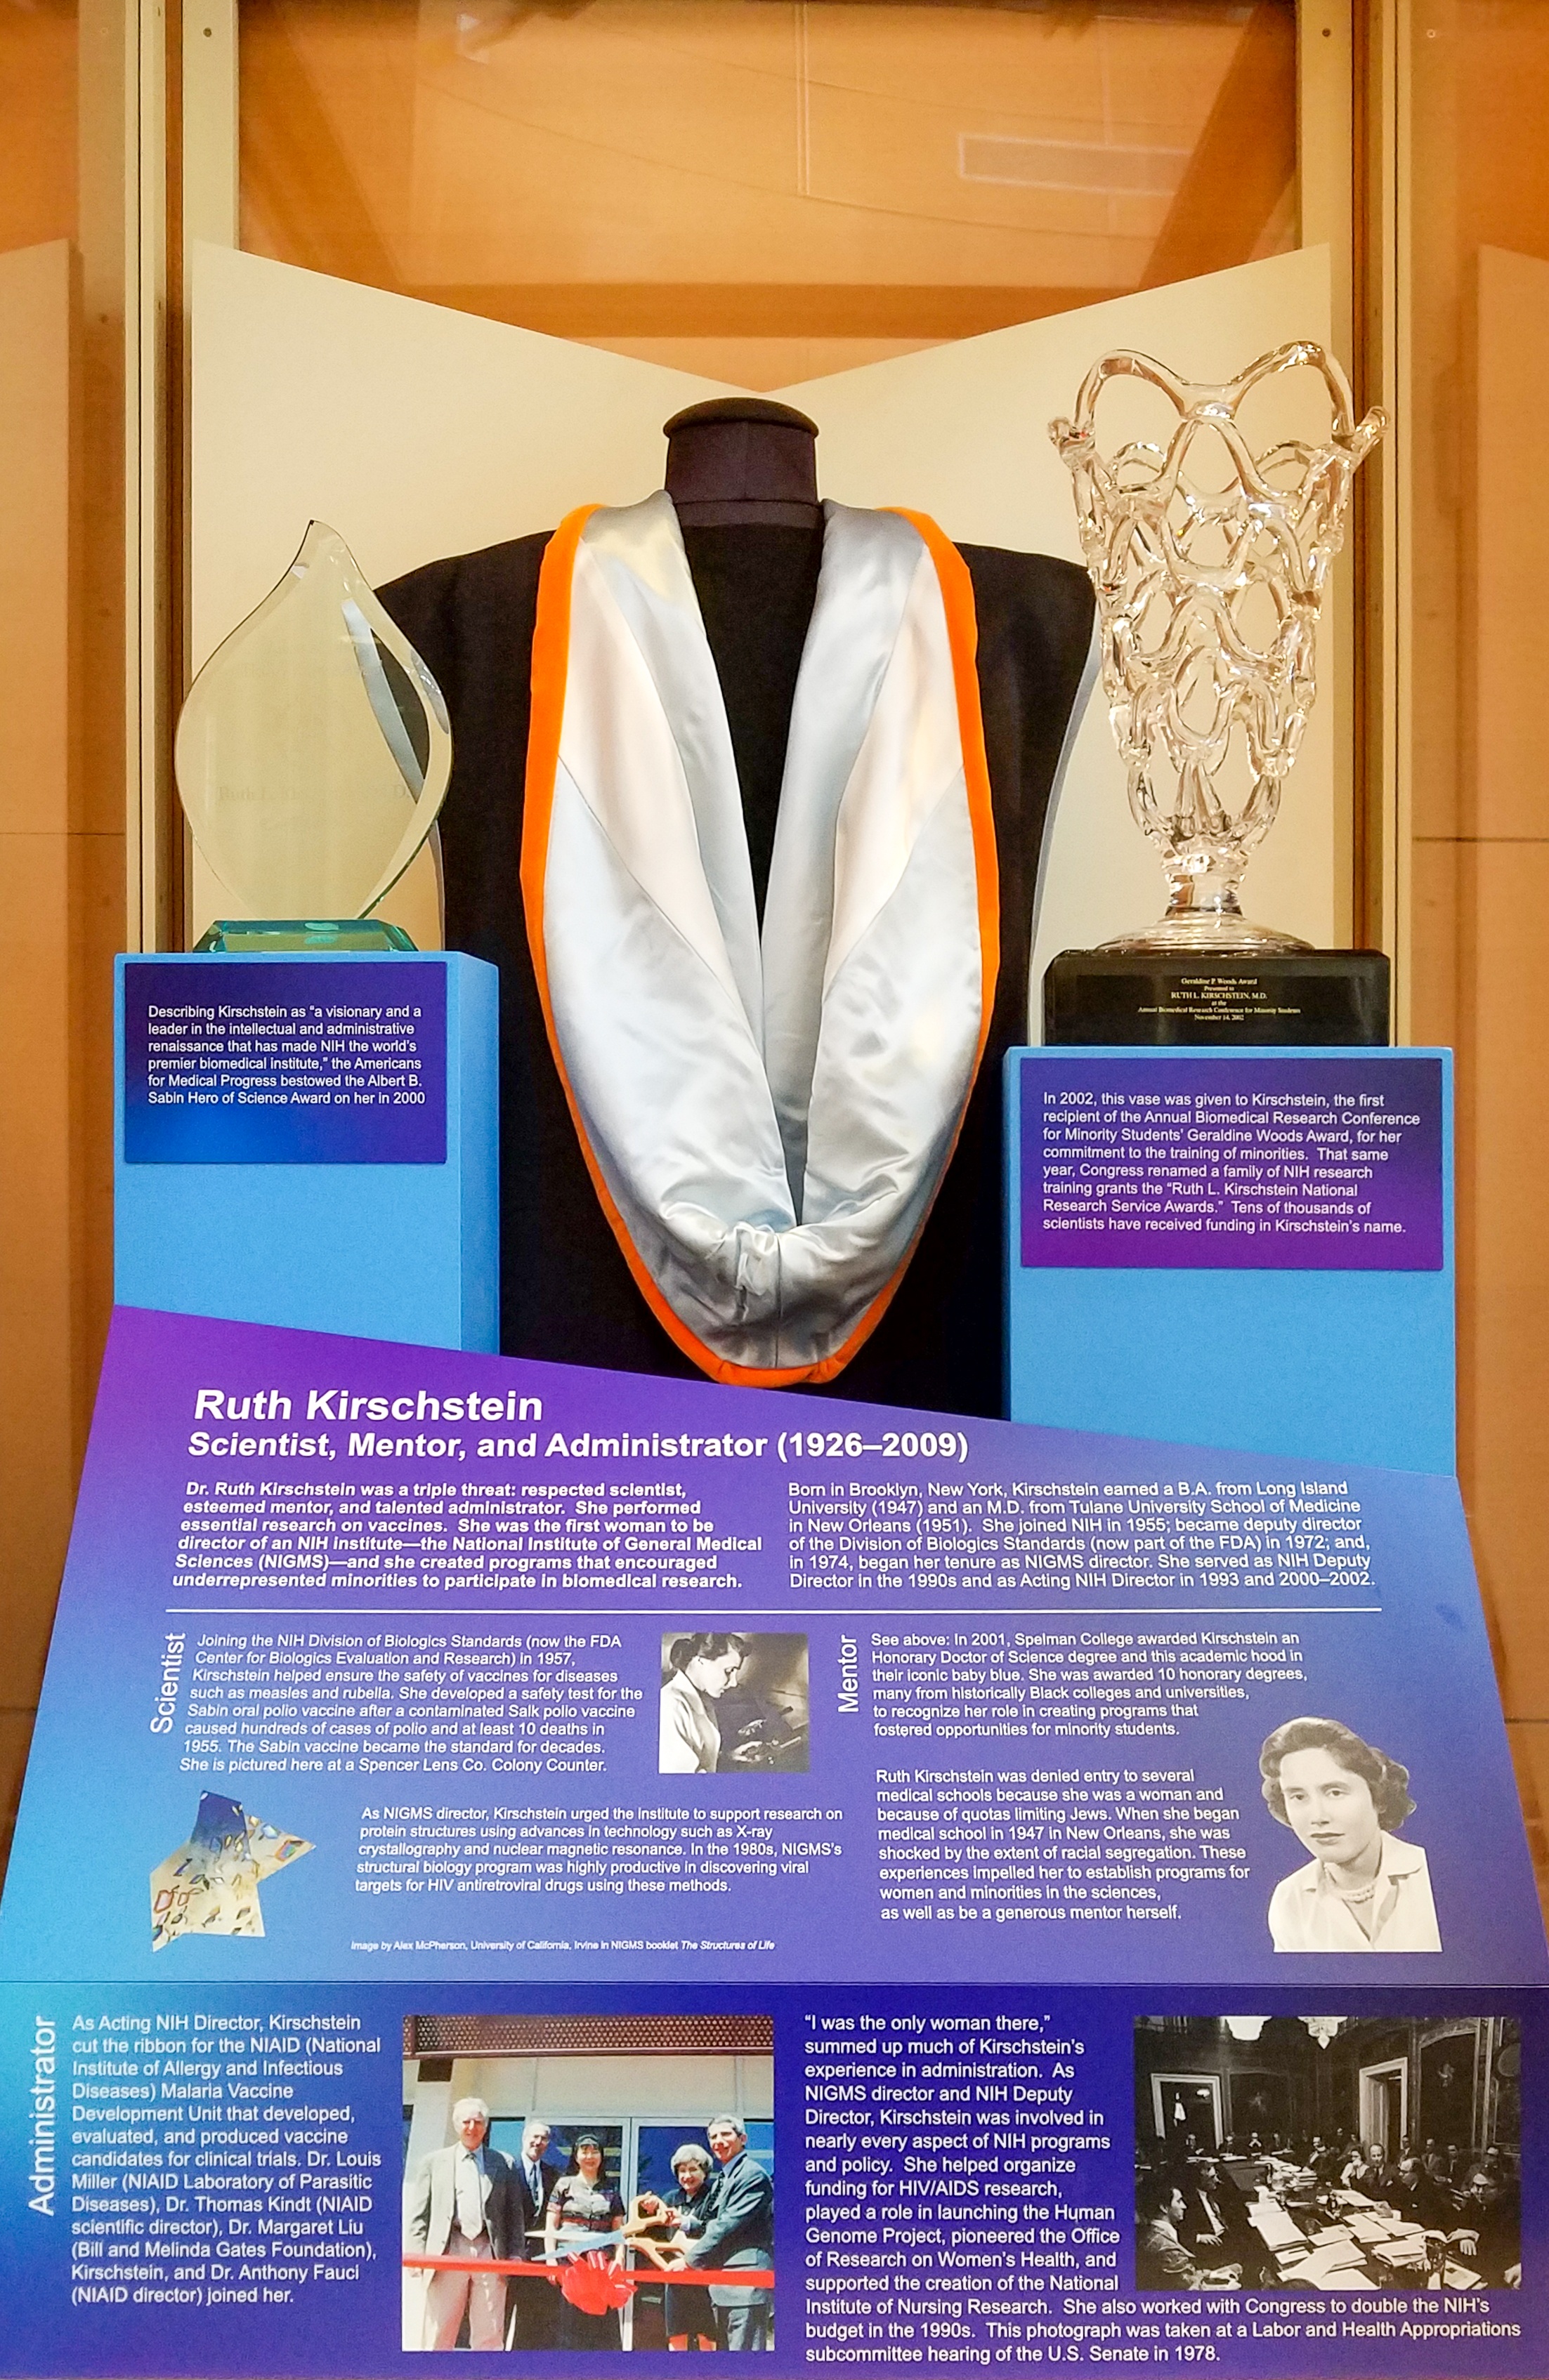 a photo of a museum display on Dr. Ruth Kirschstein with information about her career, a glass award, a glass vase, and a master's degree hood and robe